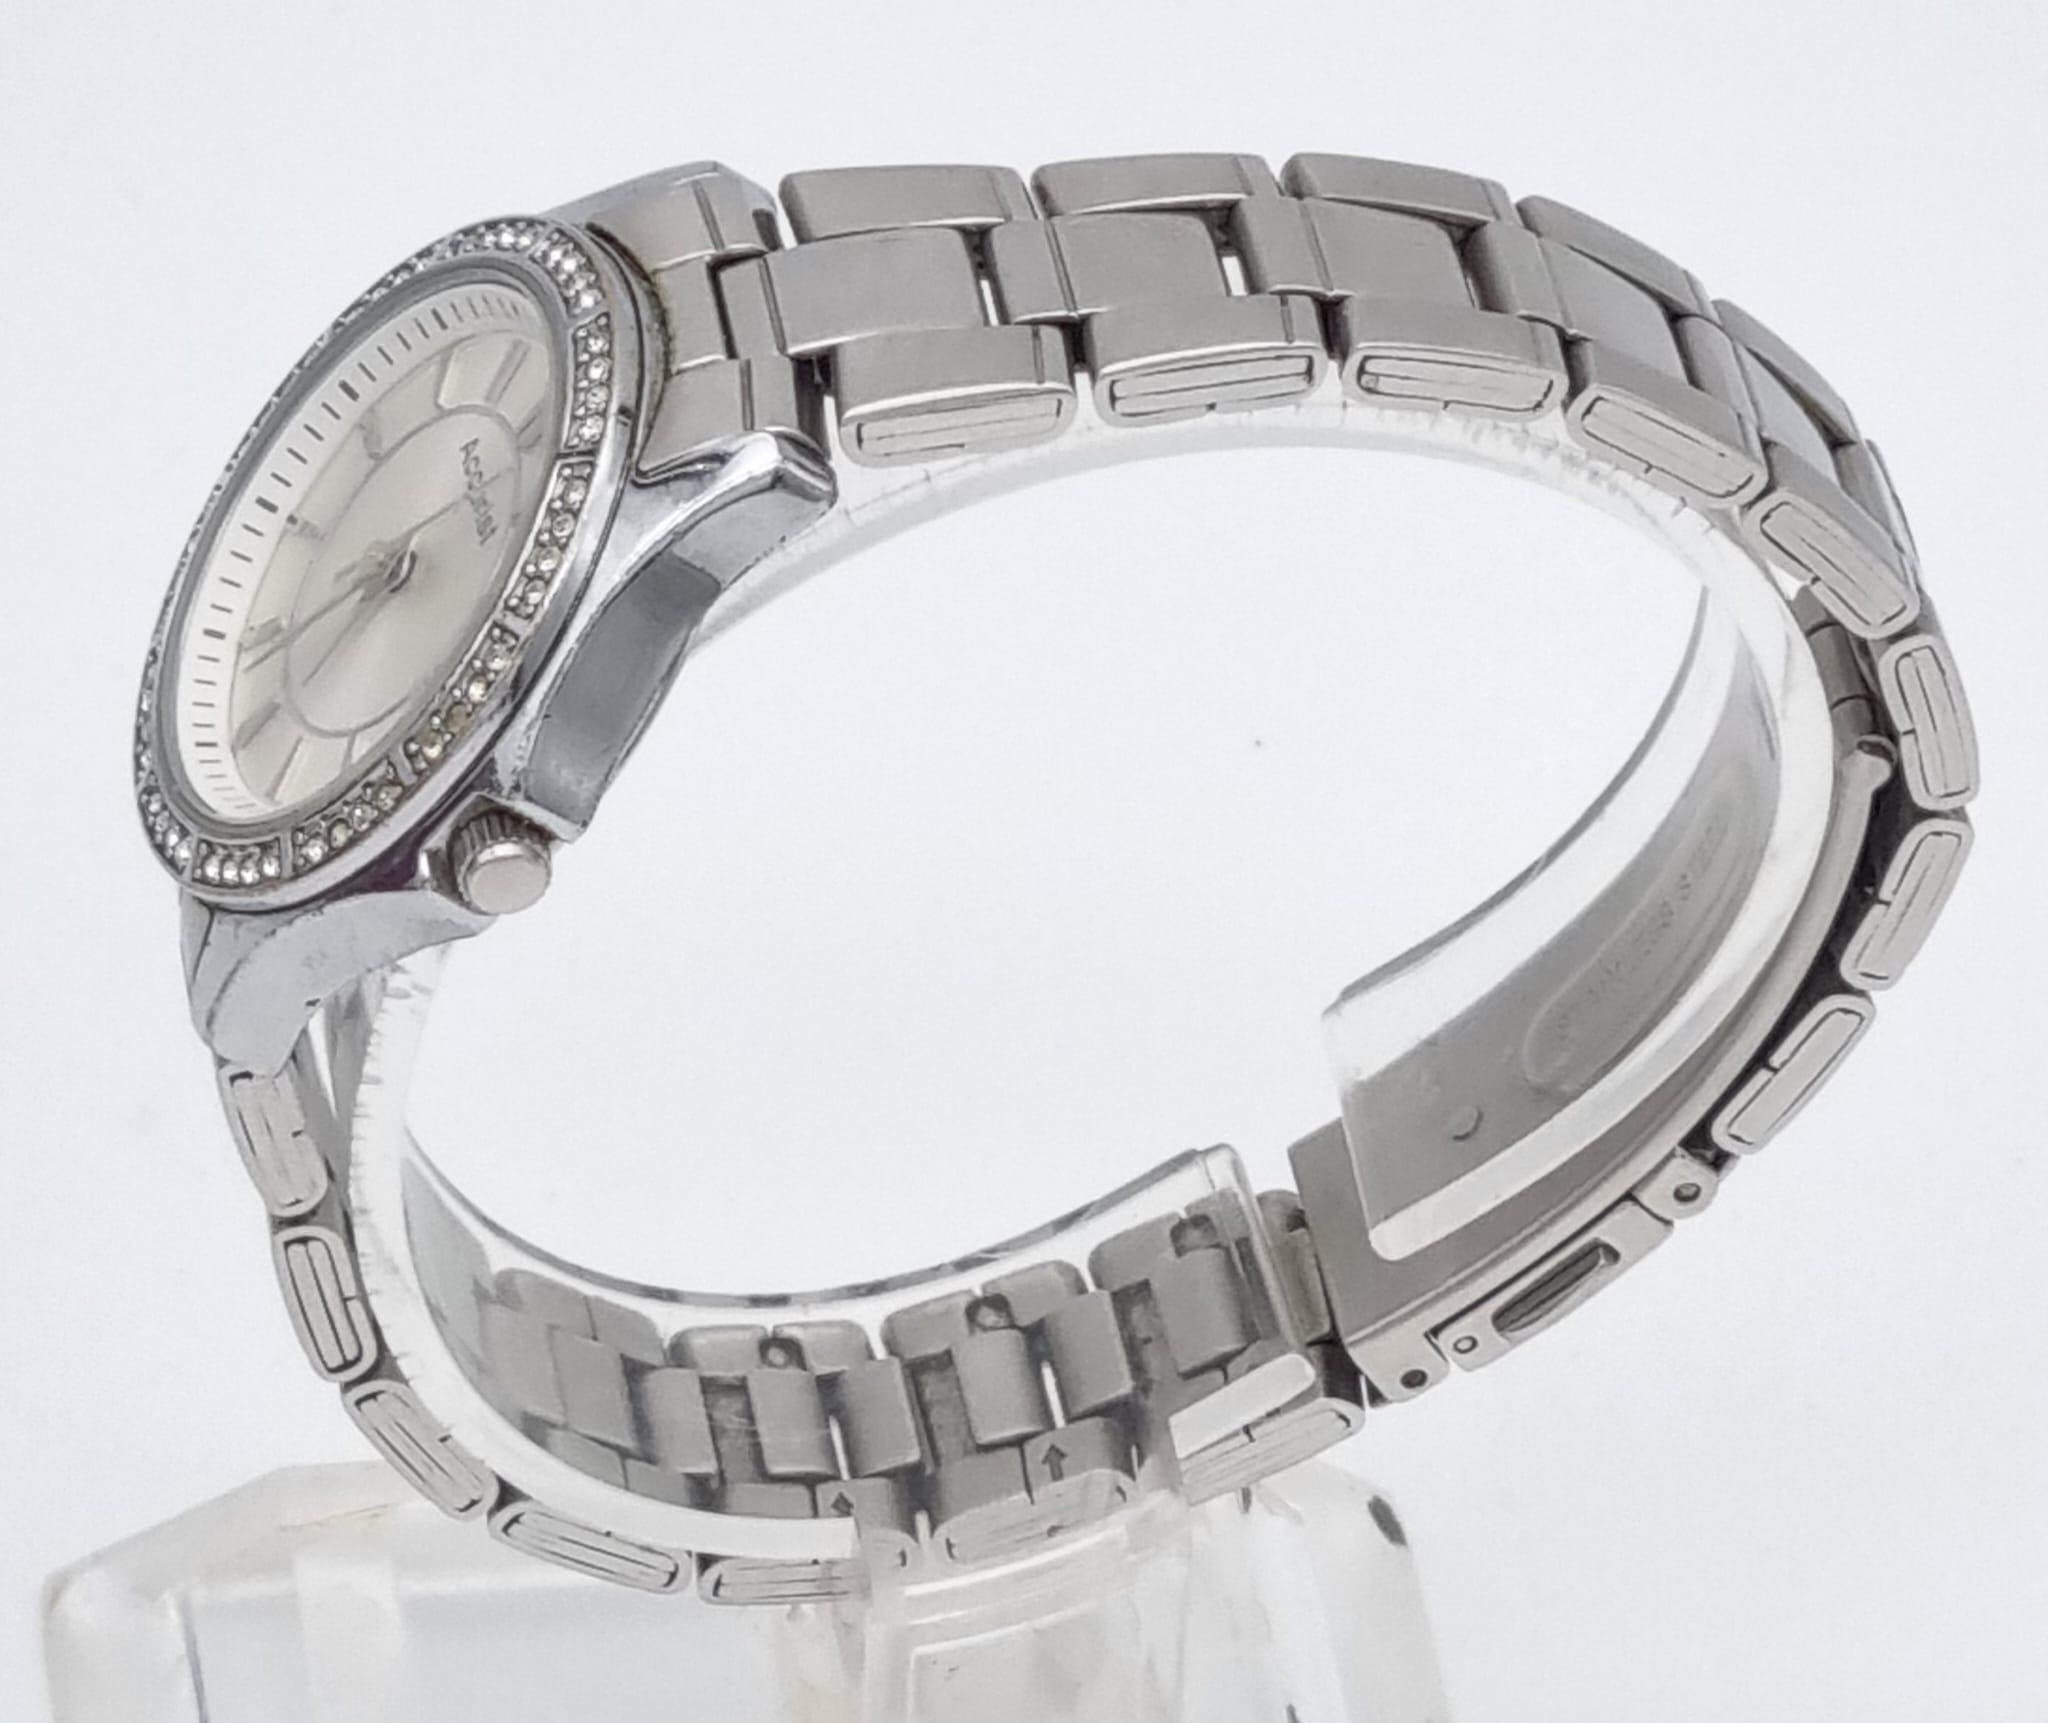 A Quality Accurist Ladies Diamonte Watch. Stainless steel strap and case - 28mm. Silver tone dial. - Image 4 of 10